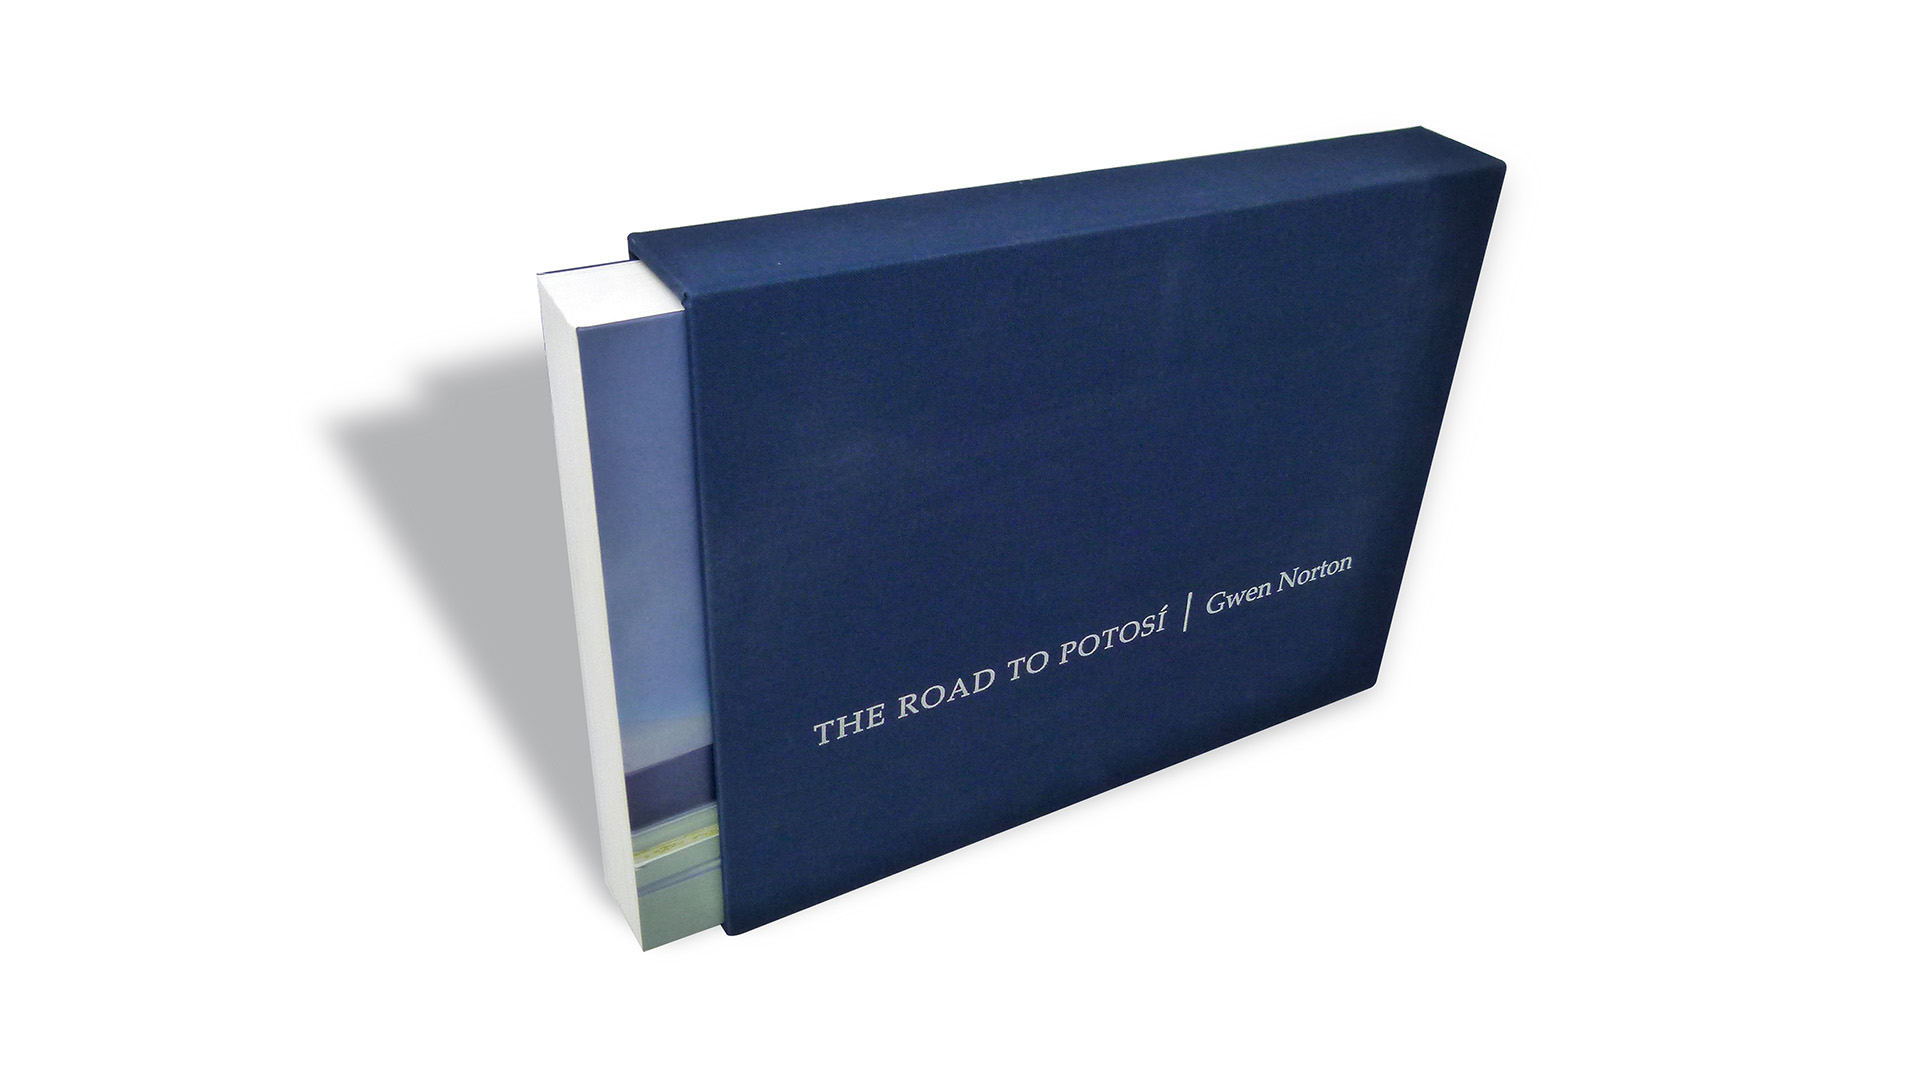 Creative Book Design: ‘The Road to Potosí’ - PaperSpecs